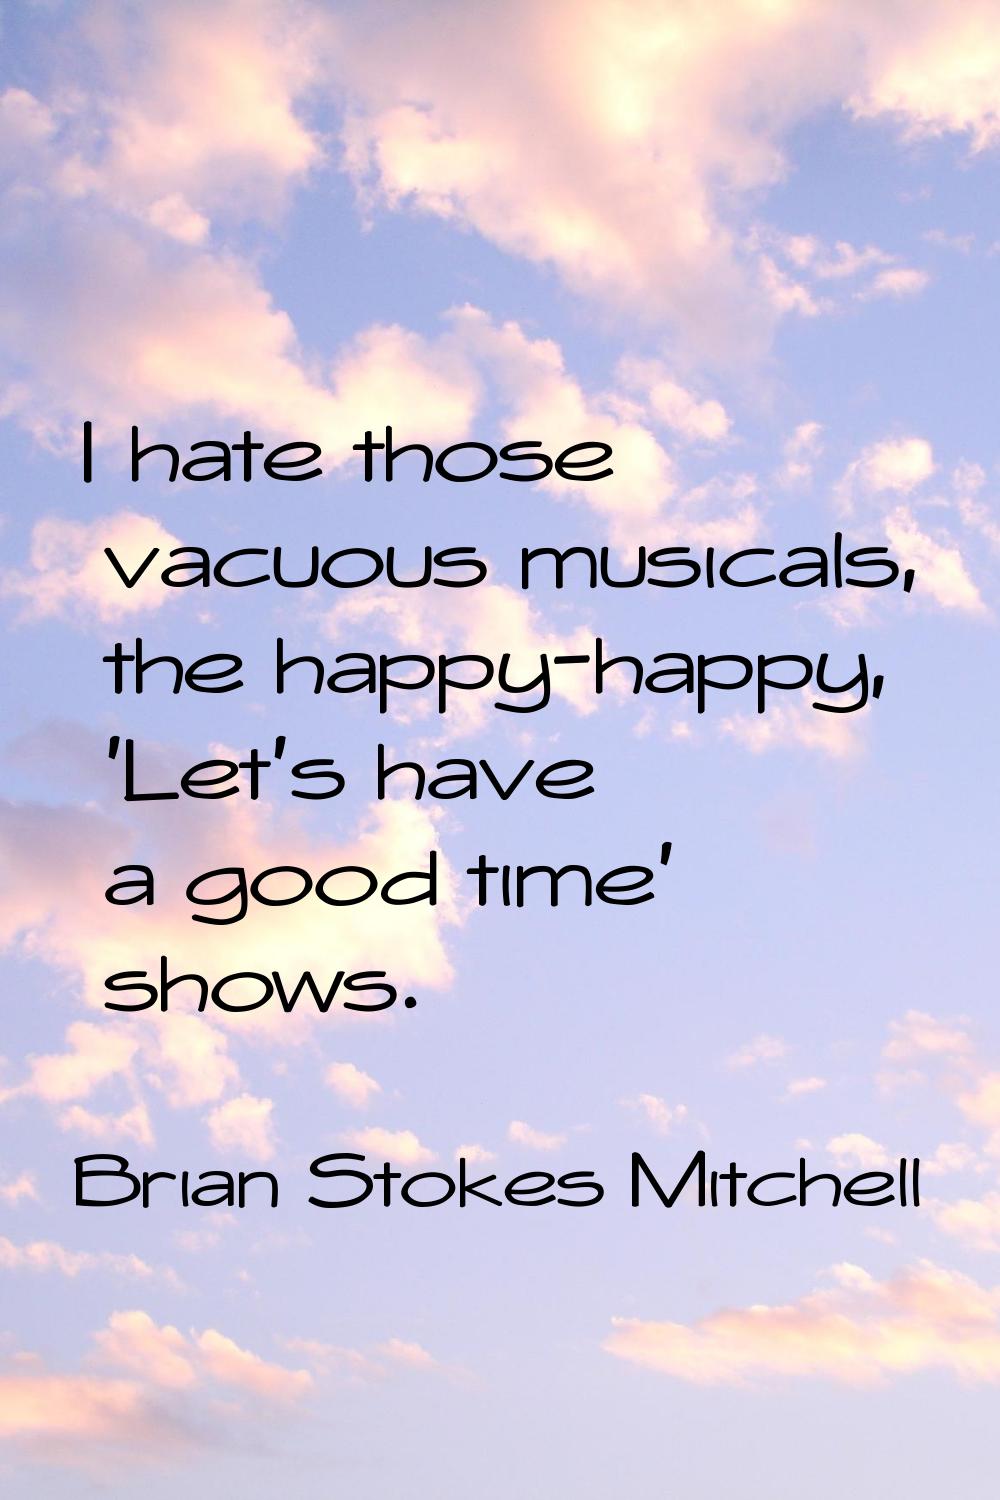 I hate those vacuous musicals, the happy-happy, 'Let's have a good time' shows.